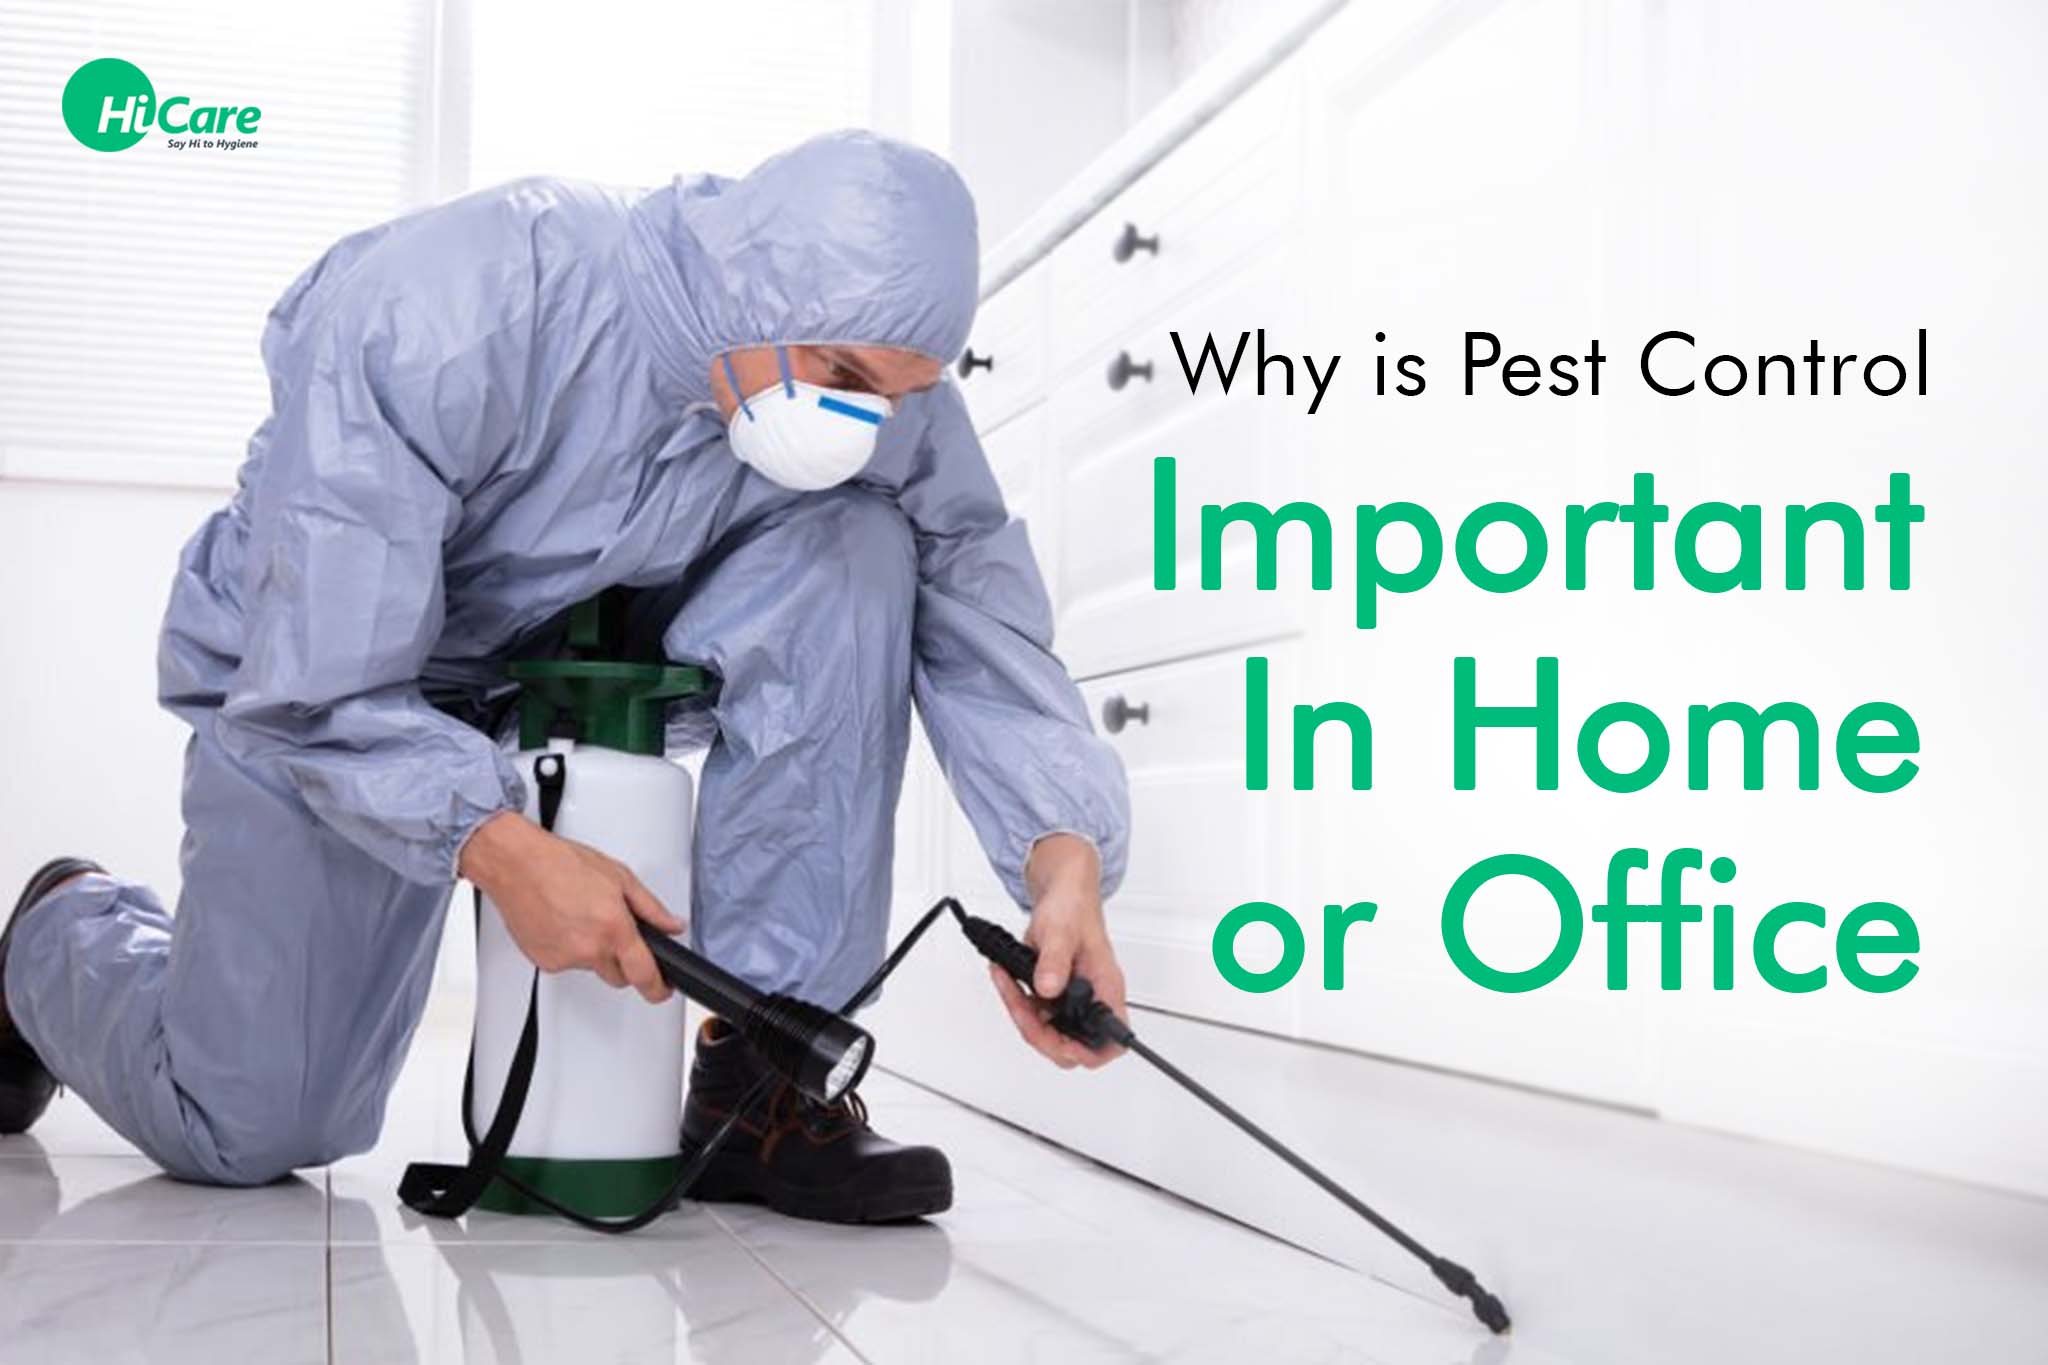 why is pest control important in home and hospital